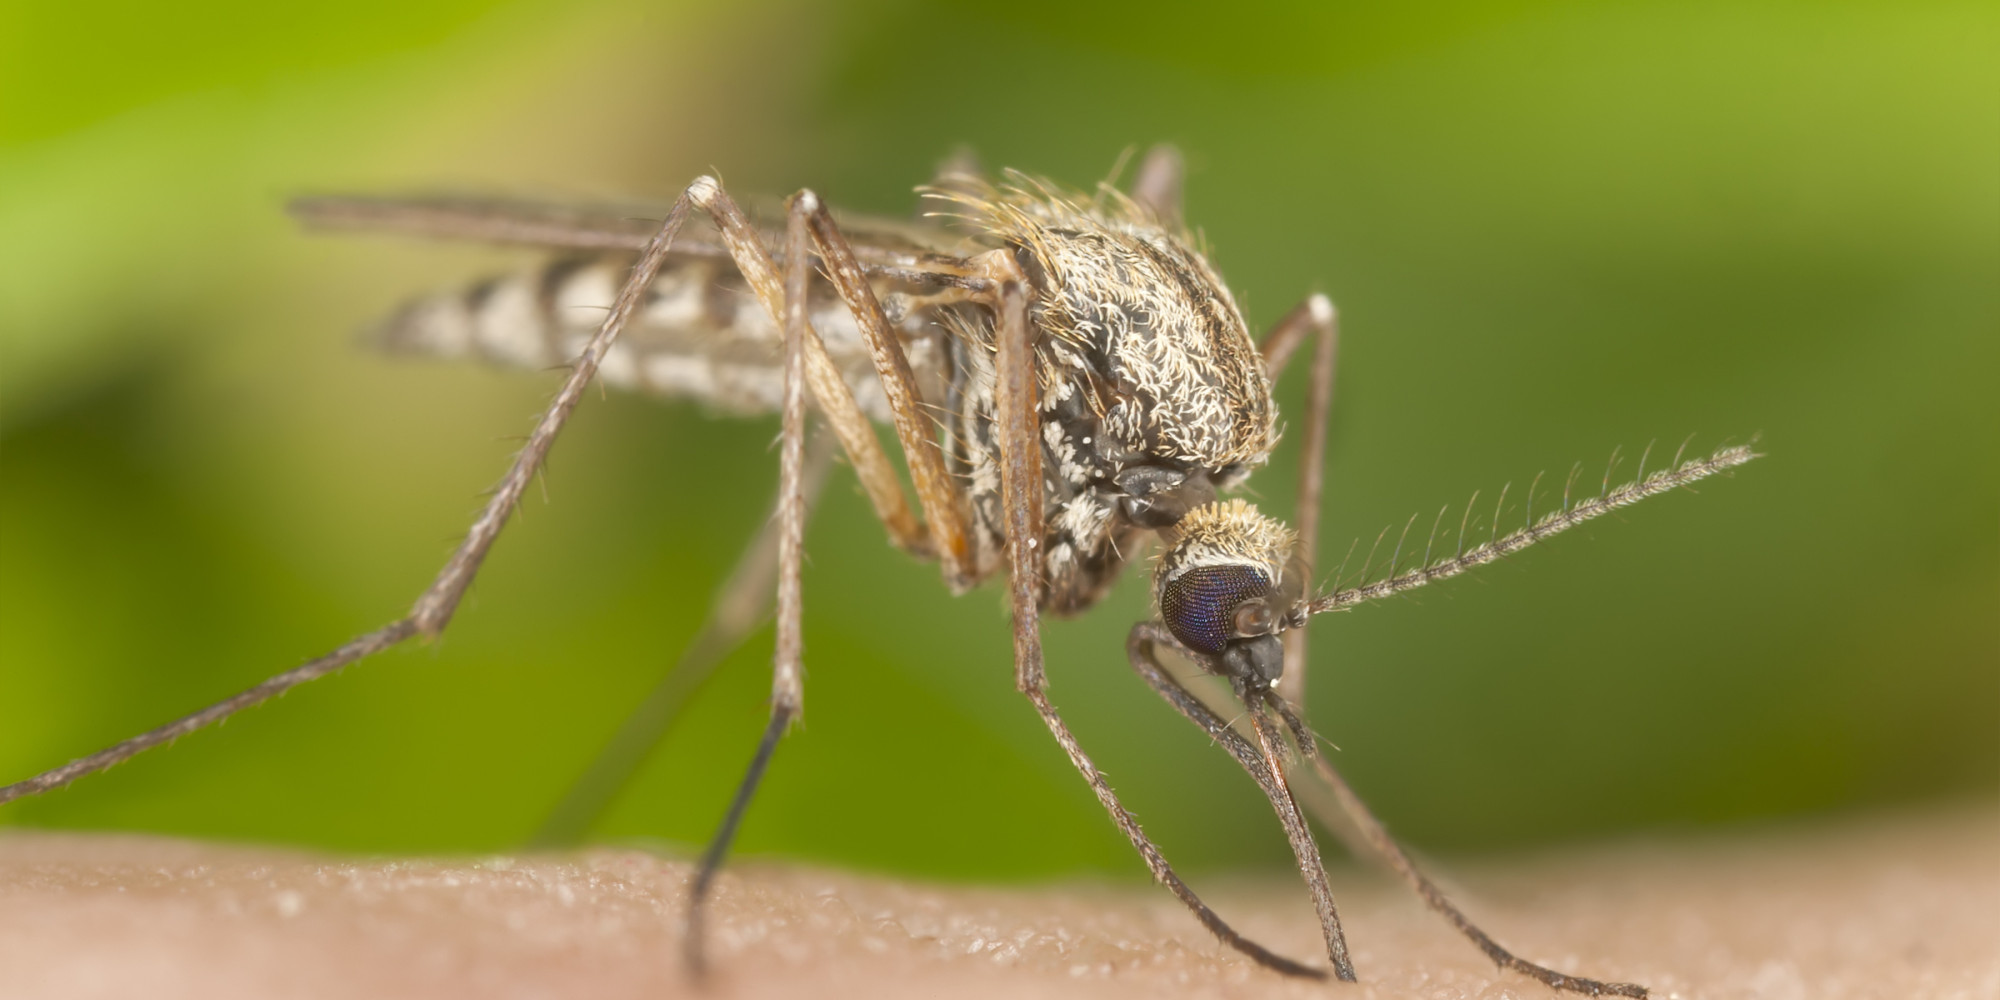 Body Odour Genes Determine Your Chance Of Getting A Mosquito Bite